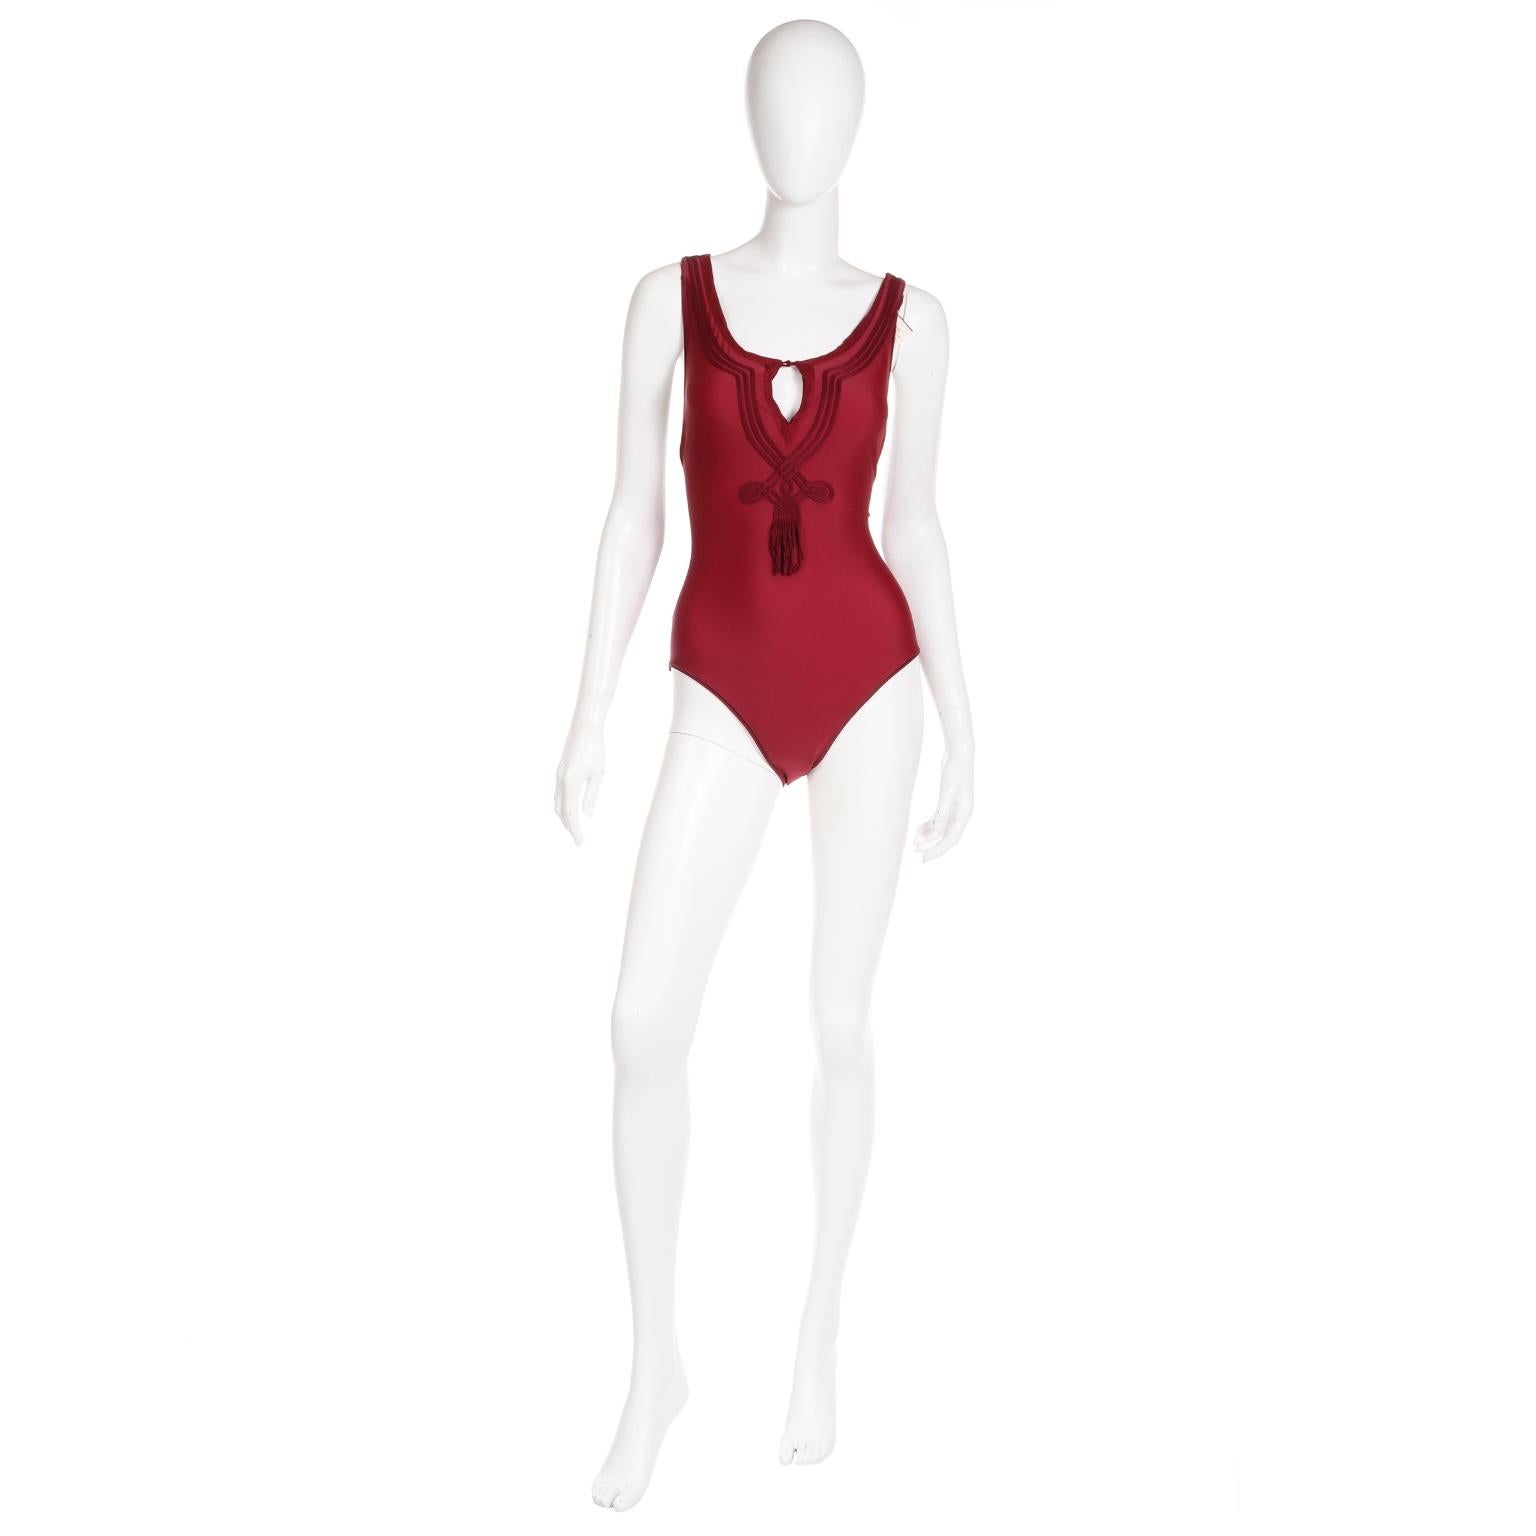 This incredible vintage Jean Paul Gaultier swimsuit was never worn and still has its original tags attached! The one piece suit is in a rich burgundy red and it has gorgeous soutache embroidery with fringe. The front has a single button closure